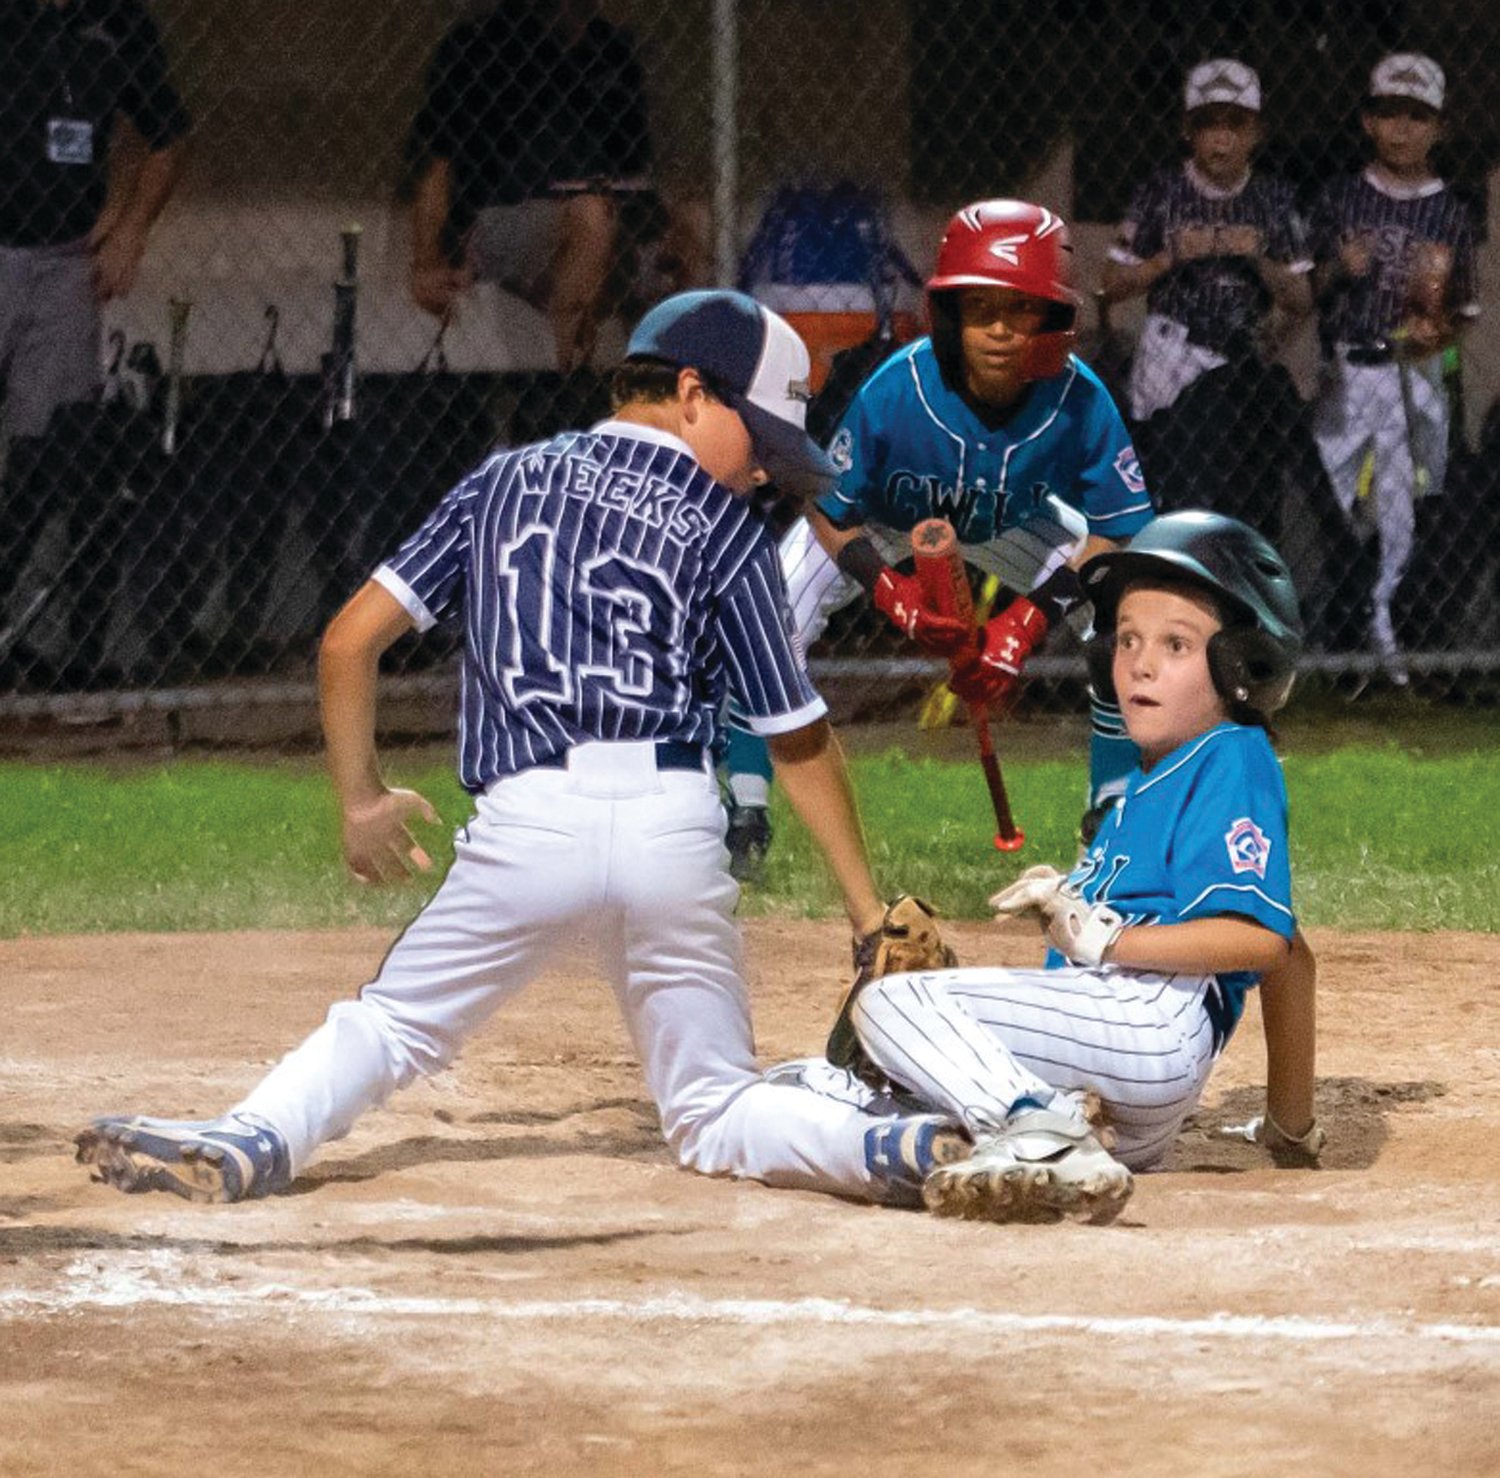 THE PLAY AT THE PLATE: CWLL’s Tommy Glasgow slides into home plate.